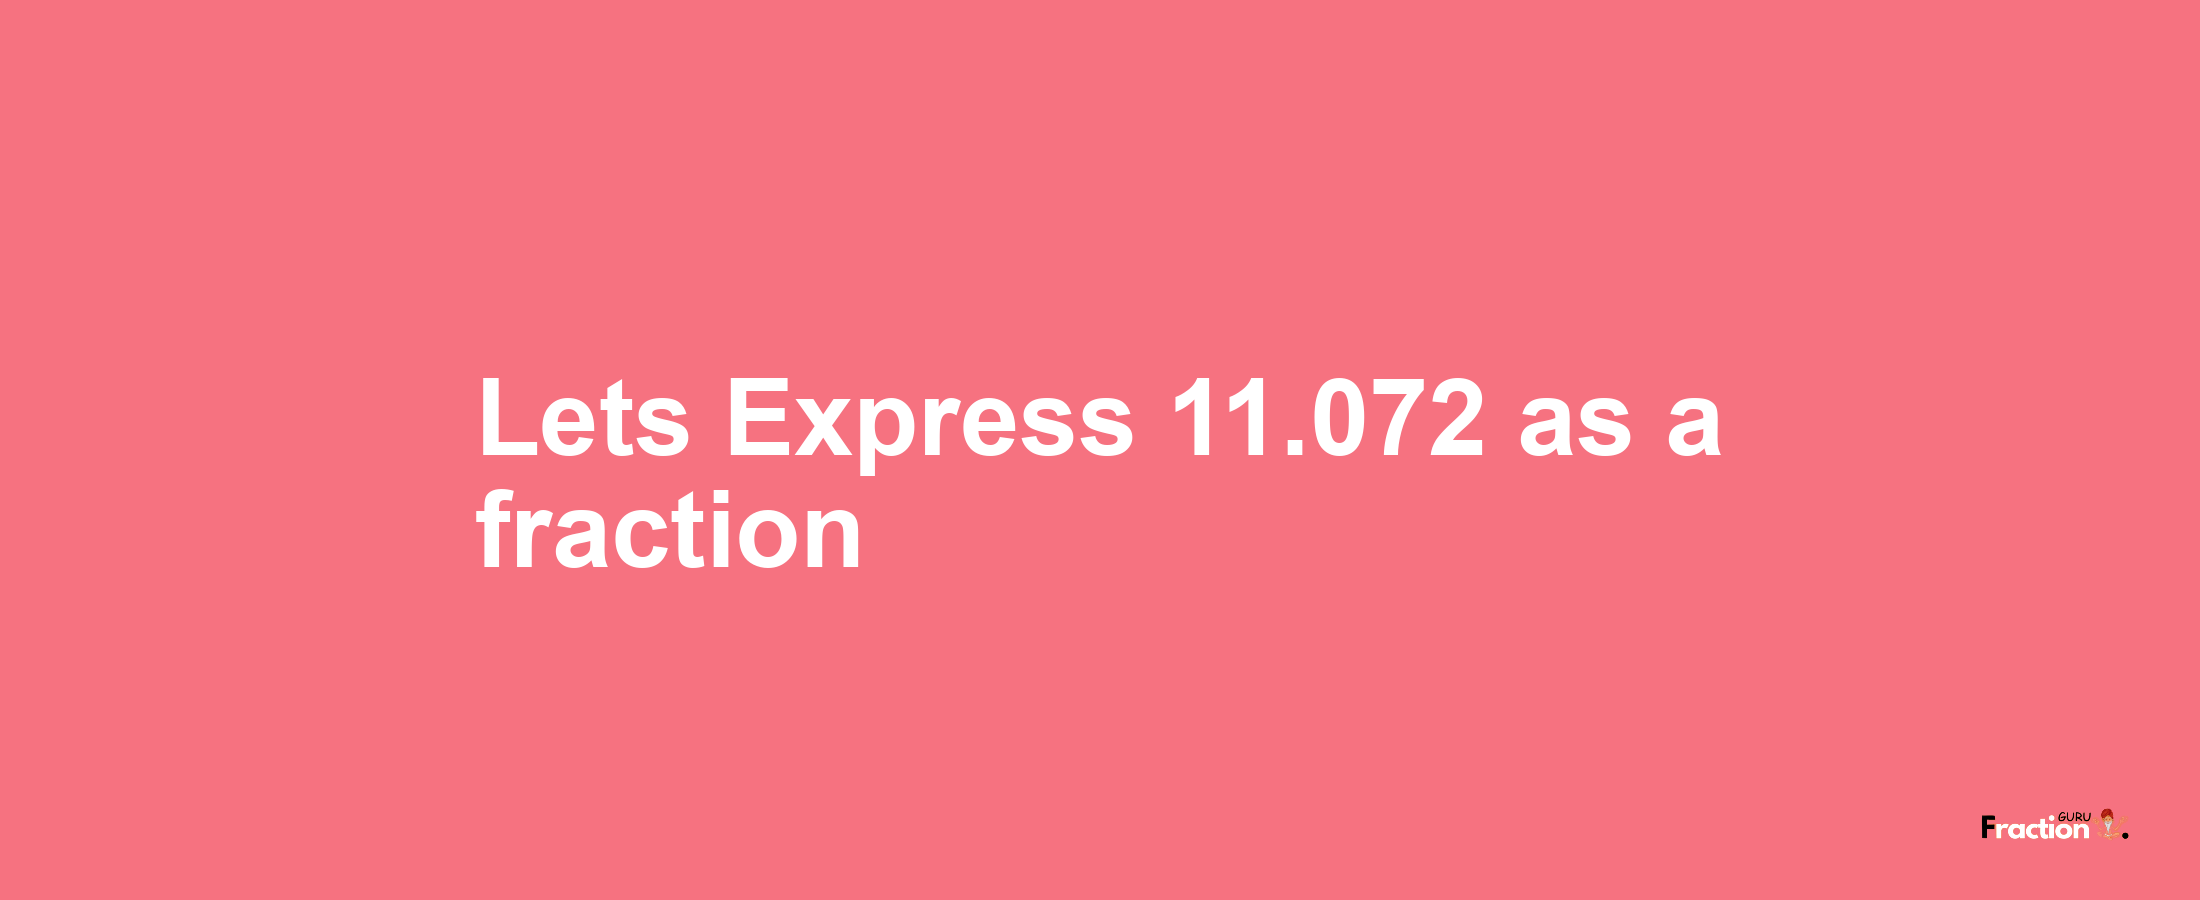 Lets Express 11.072 as afraction